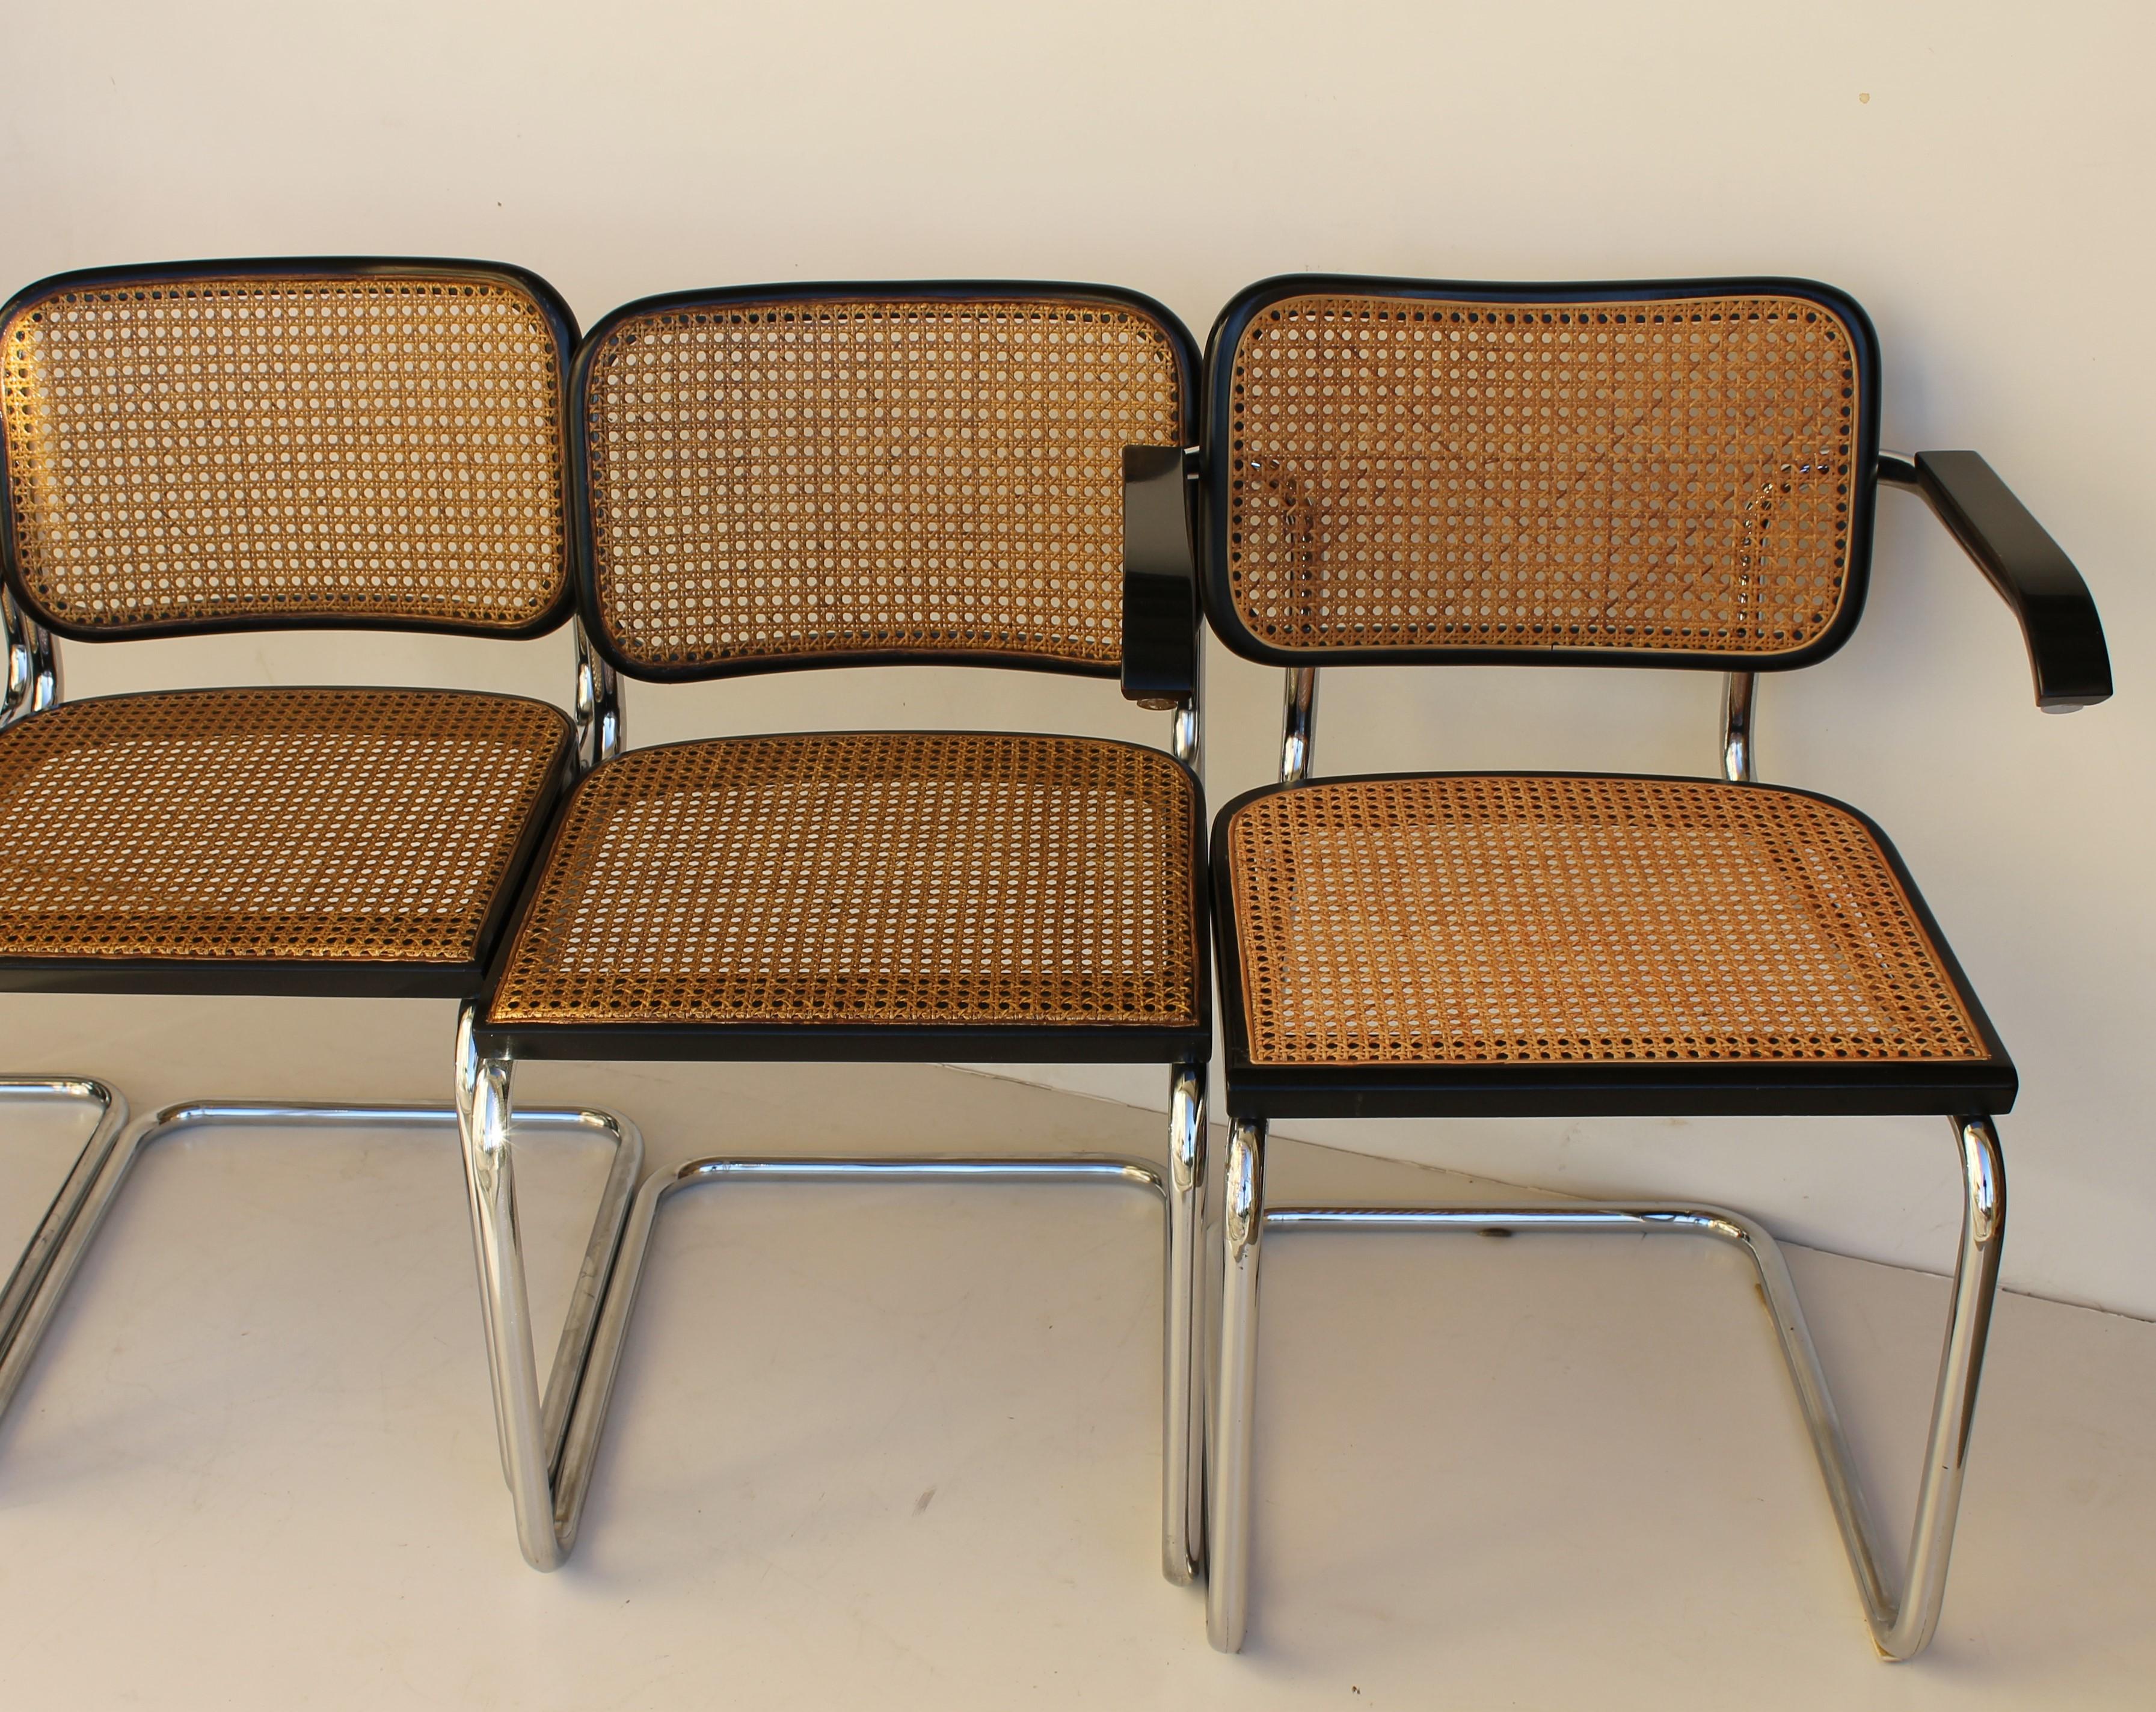 Four Cesca chairs and two armchairs designed by Marcel Breuer for Gavina dated circa 1965 (the project was created in 1928).

All with new seats 